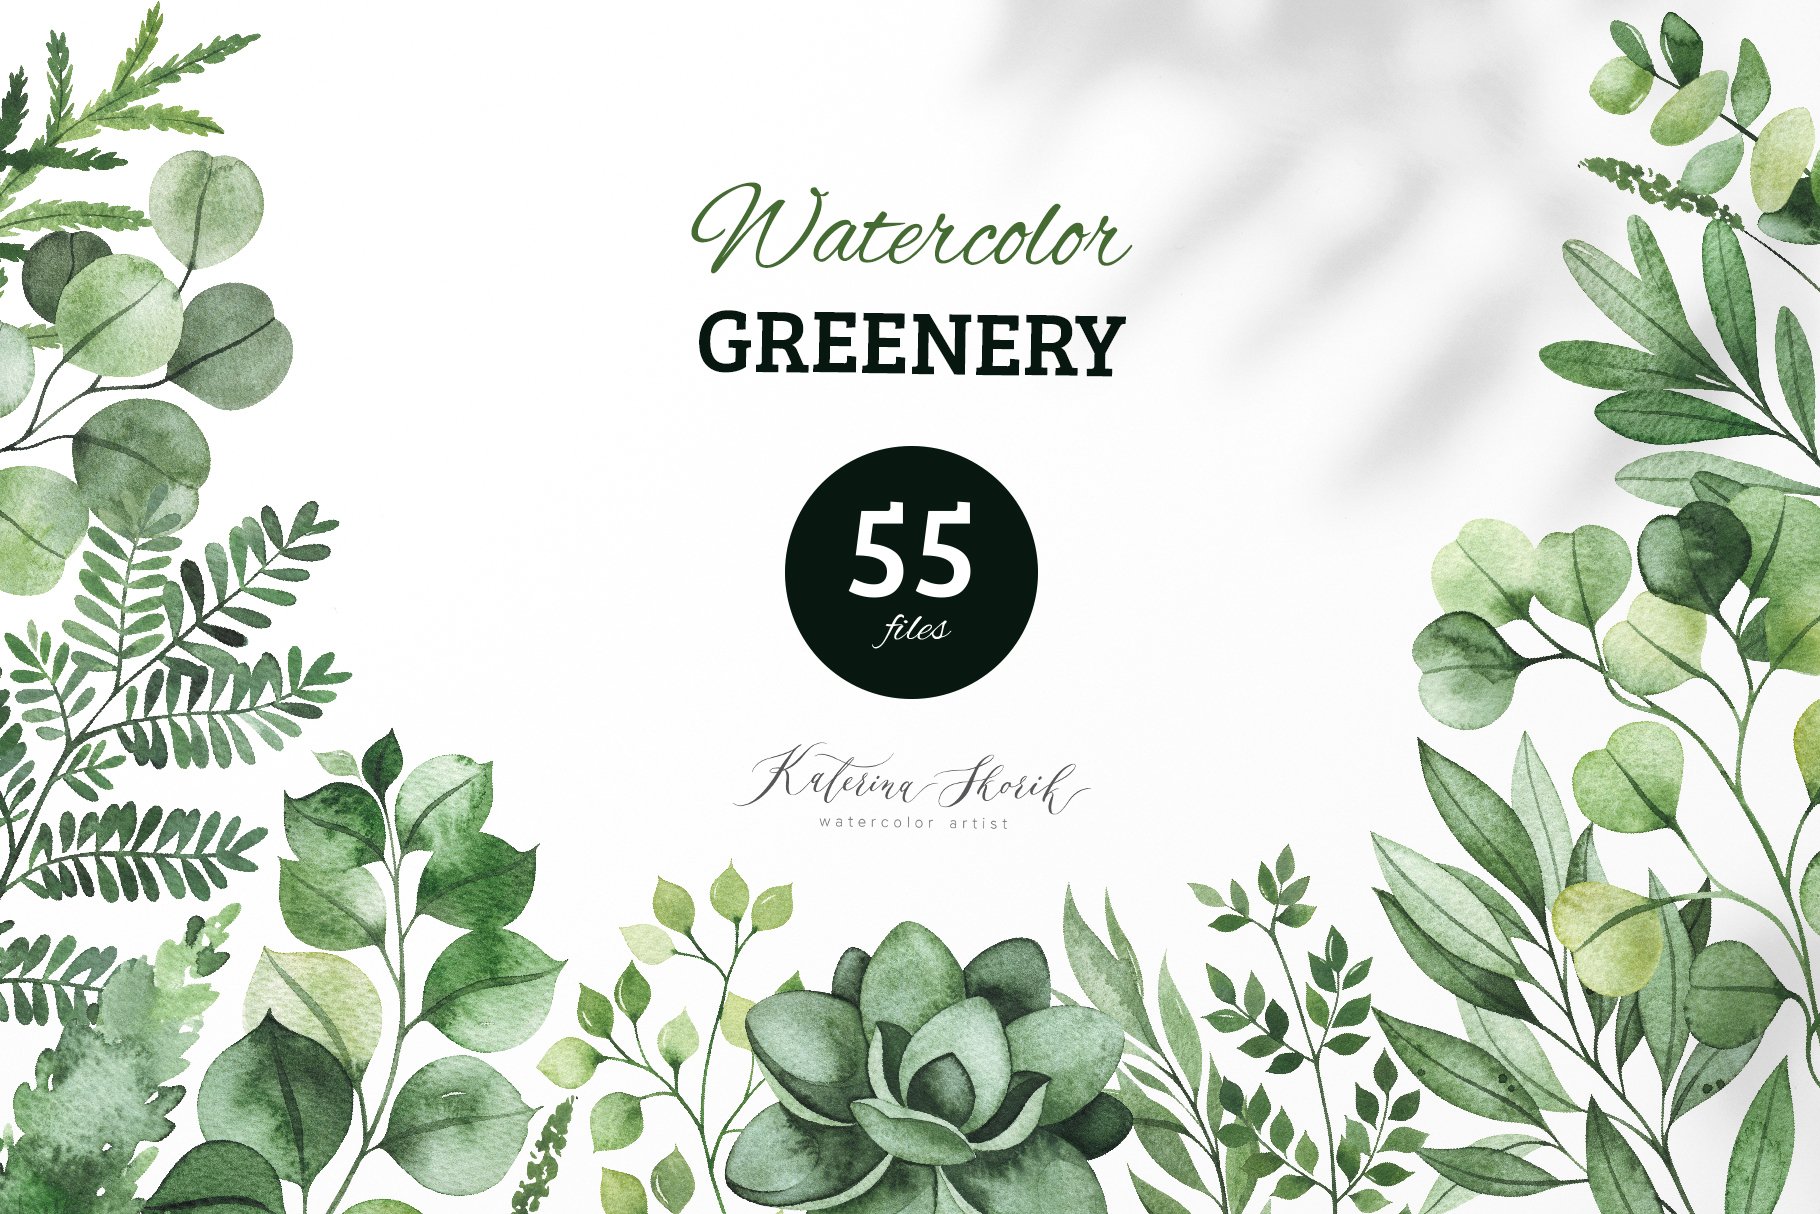 Watercolor Greenery cover image.